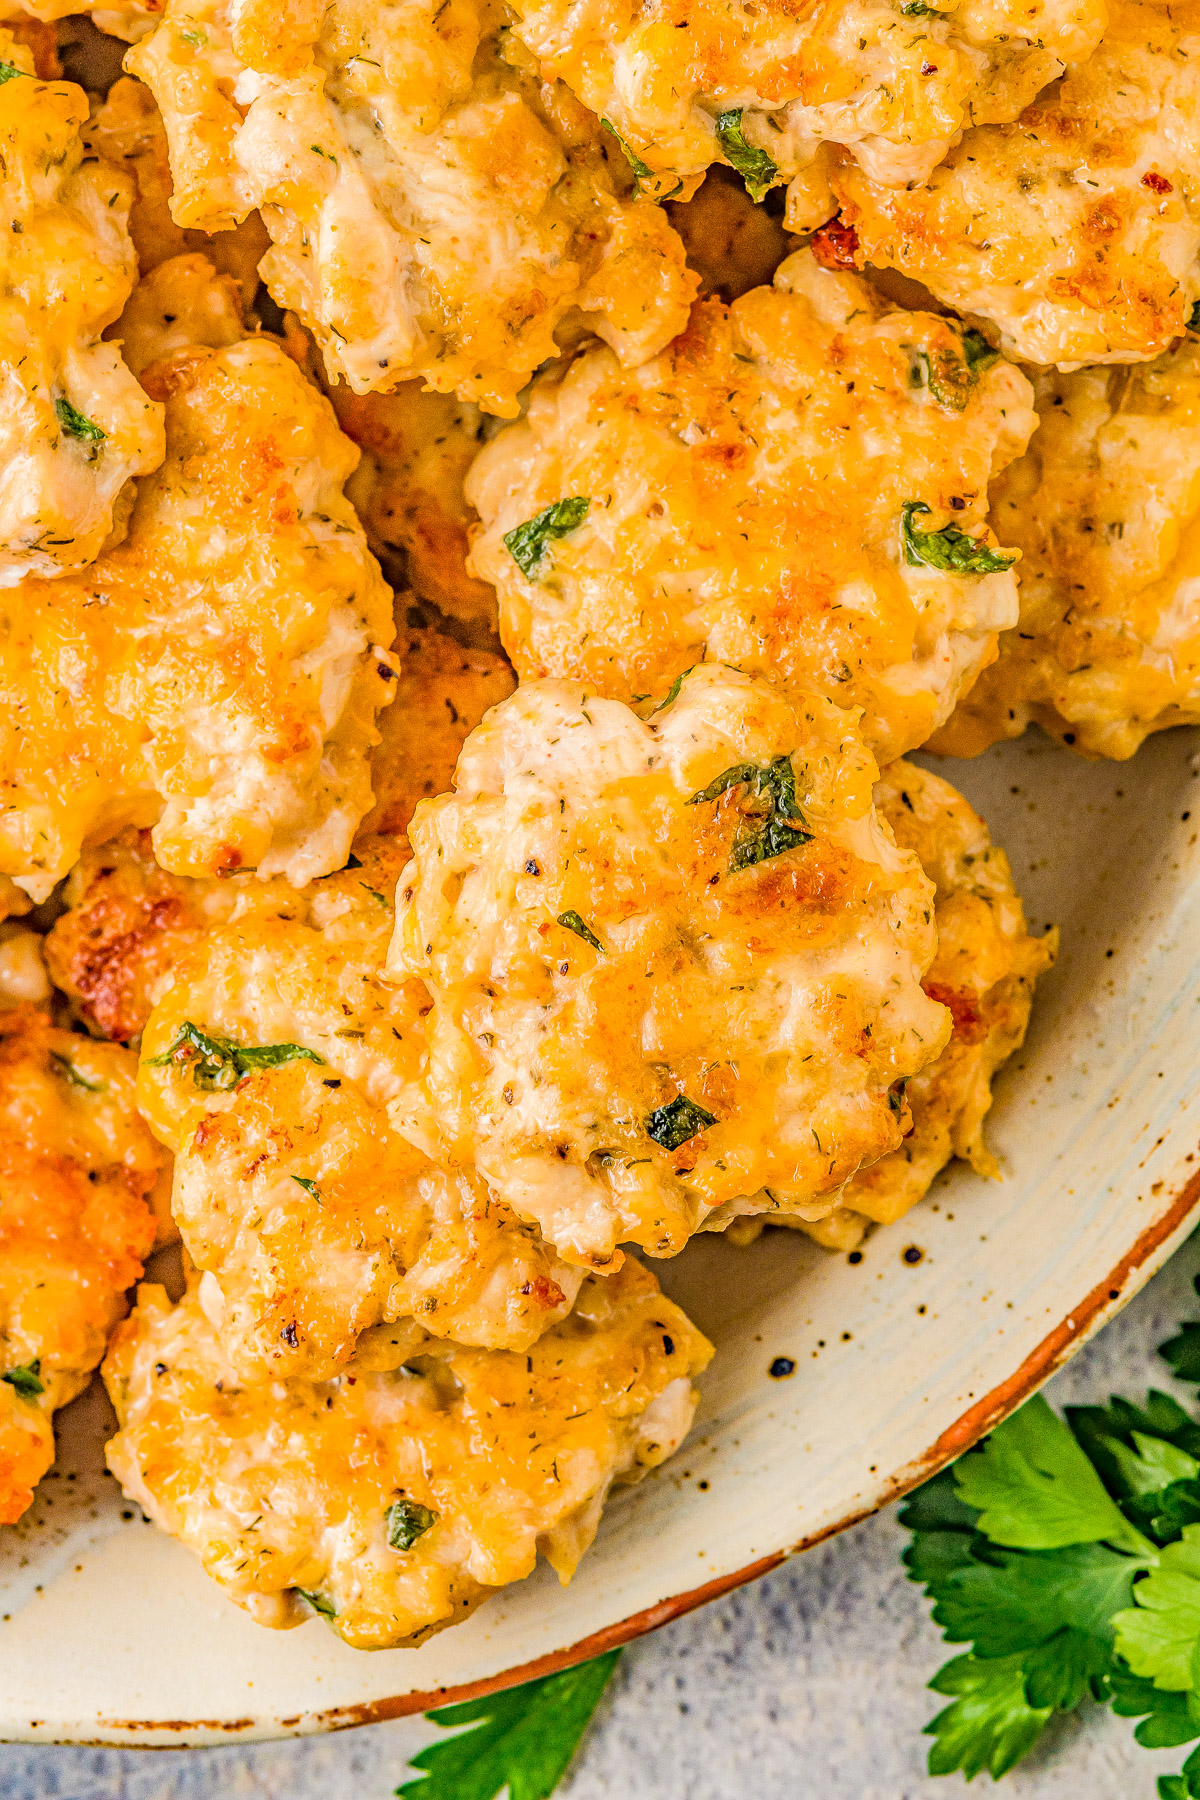 Cheesy Chicken Fritters - These AMAZING fritters include tender and juicy chicken, mozzarella and cheddar cheeses, and an array of spices to give them tons of great flavor! Serve them as an appetizer, on slider buns for sandwiches, or as the main dish! EASY, FAST, and a guaranteed family favorite!